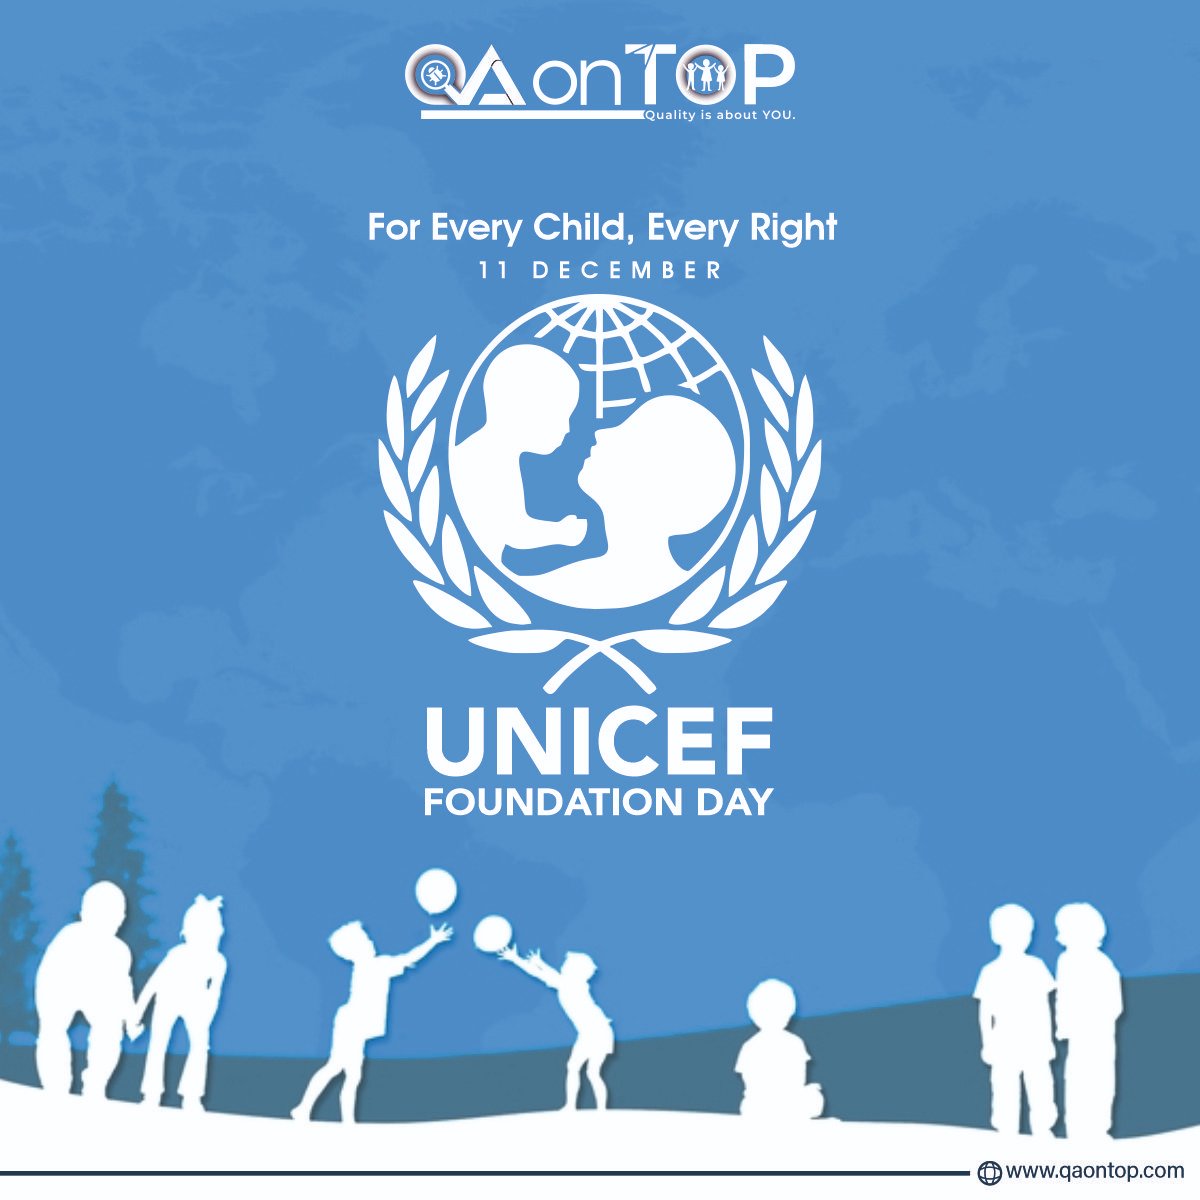 𝐔𝐍𝐈𝐂𝐄𝐅 𝐅𝐨𝐮𝐧𝐝𝐚𝐭𝐢𝐨𝐧 𝐃𝐚𝐲 - A Commitment to Quality for Every Child! 🌍✨

#UNICEFFoundationDay #QualityForKids #ForEveryChild
.
.
#SoftwareTesting #QualityAssurance #QA #Testing #TestingServices #QAExperts #TestingSolutions  #TestingExperts #QAServices